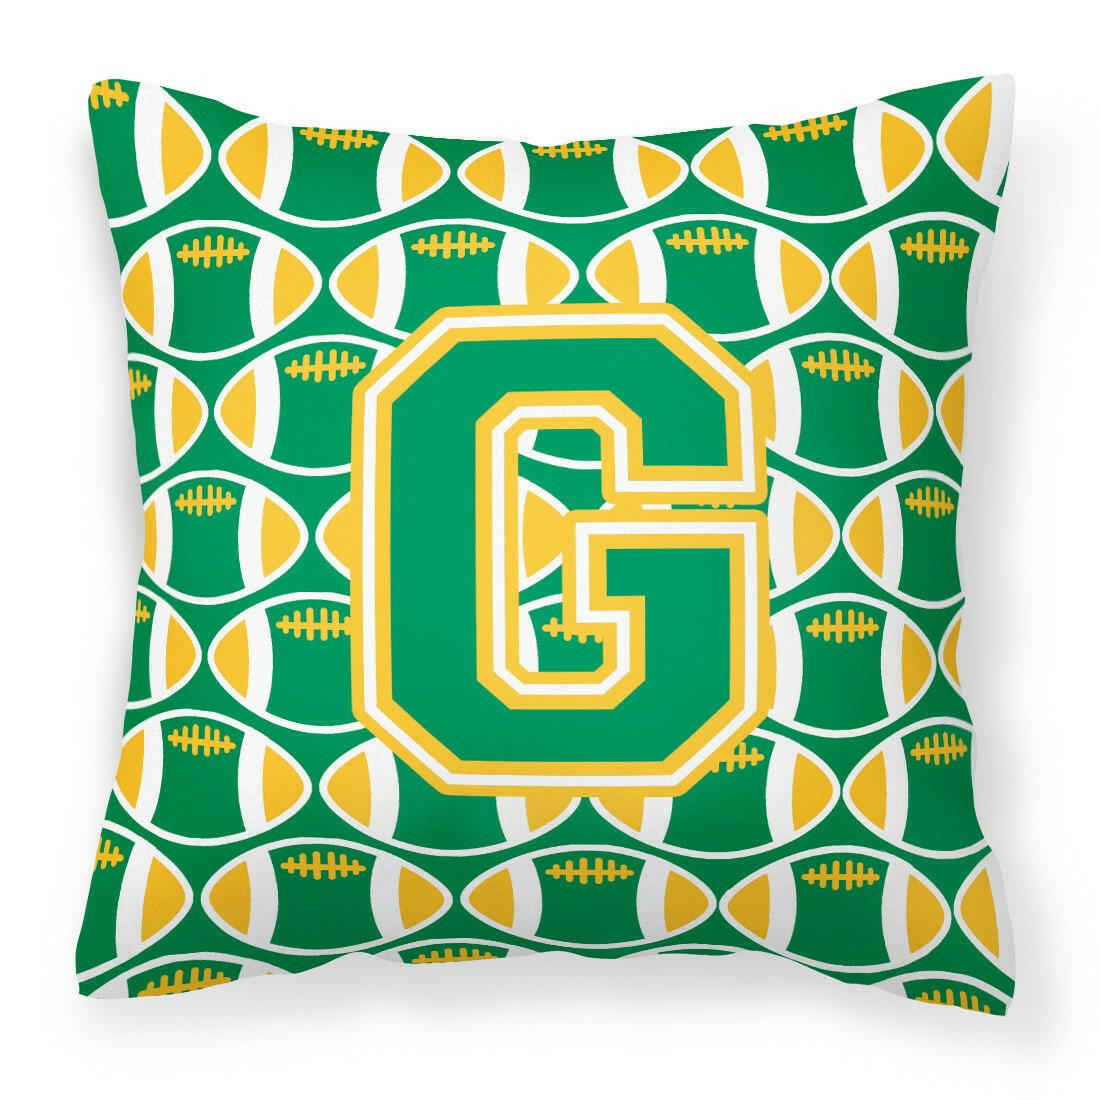 Letter G Football Green and Gold Fabric Decorative Pillow CJ1069-GPW1414 by Caroline's Treasures